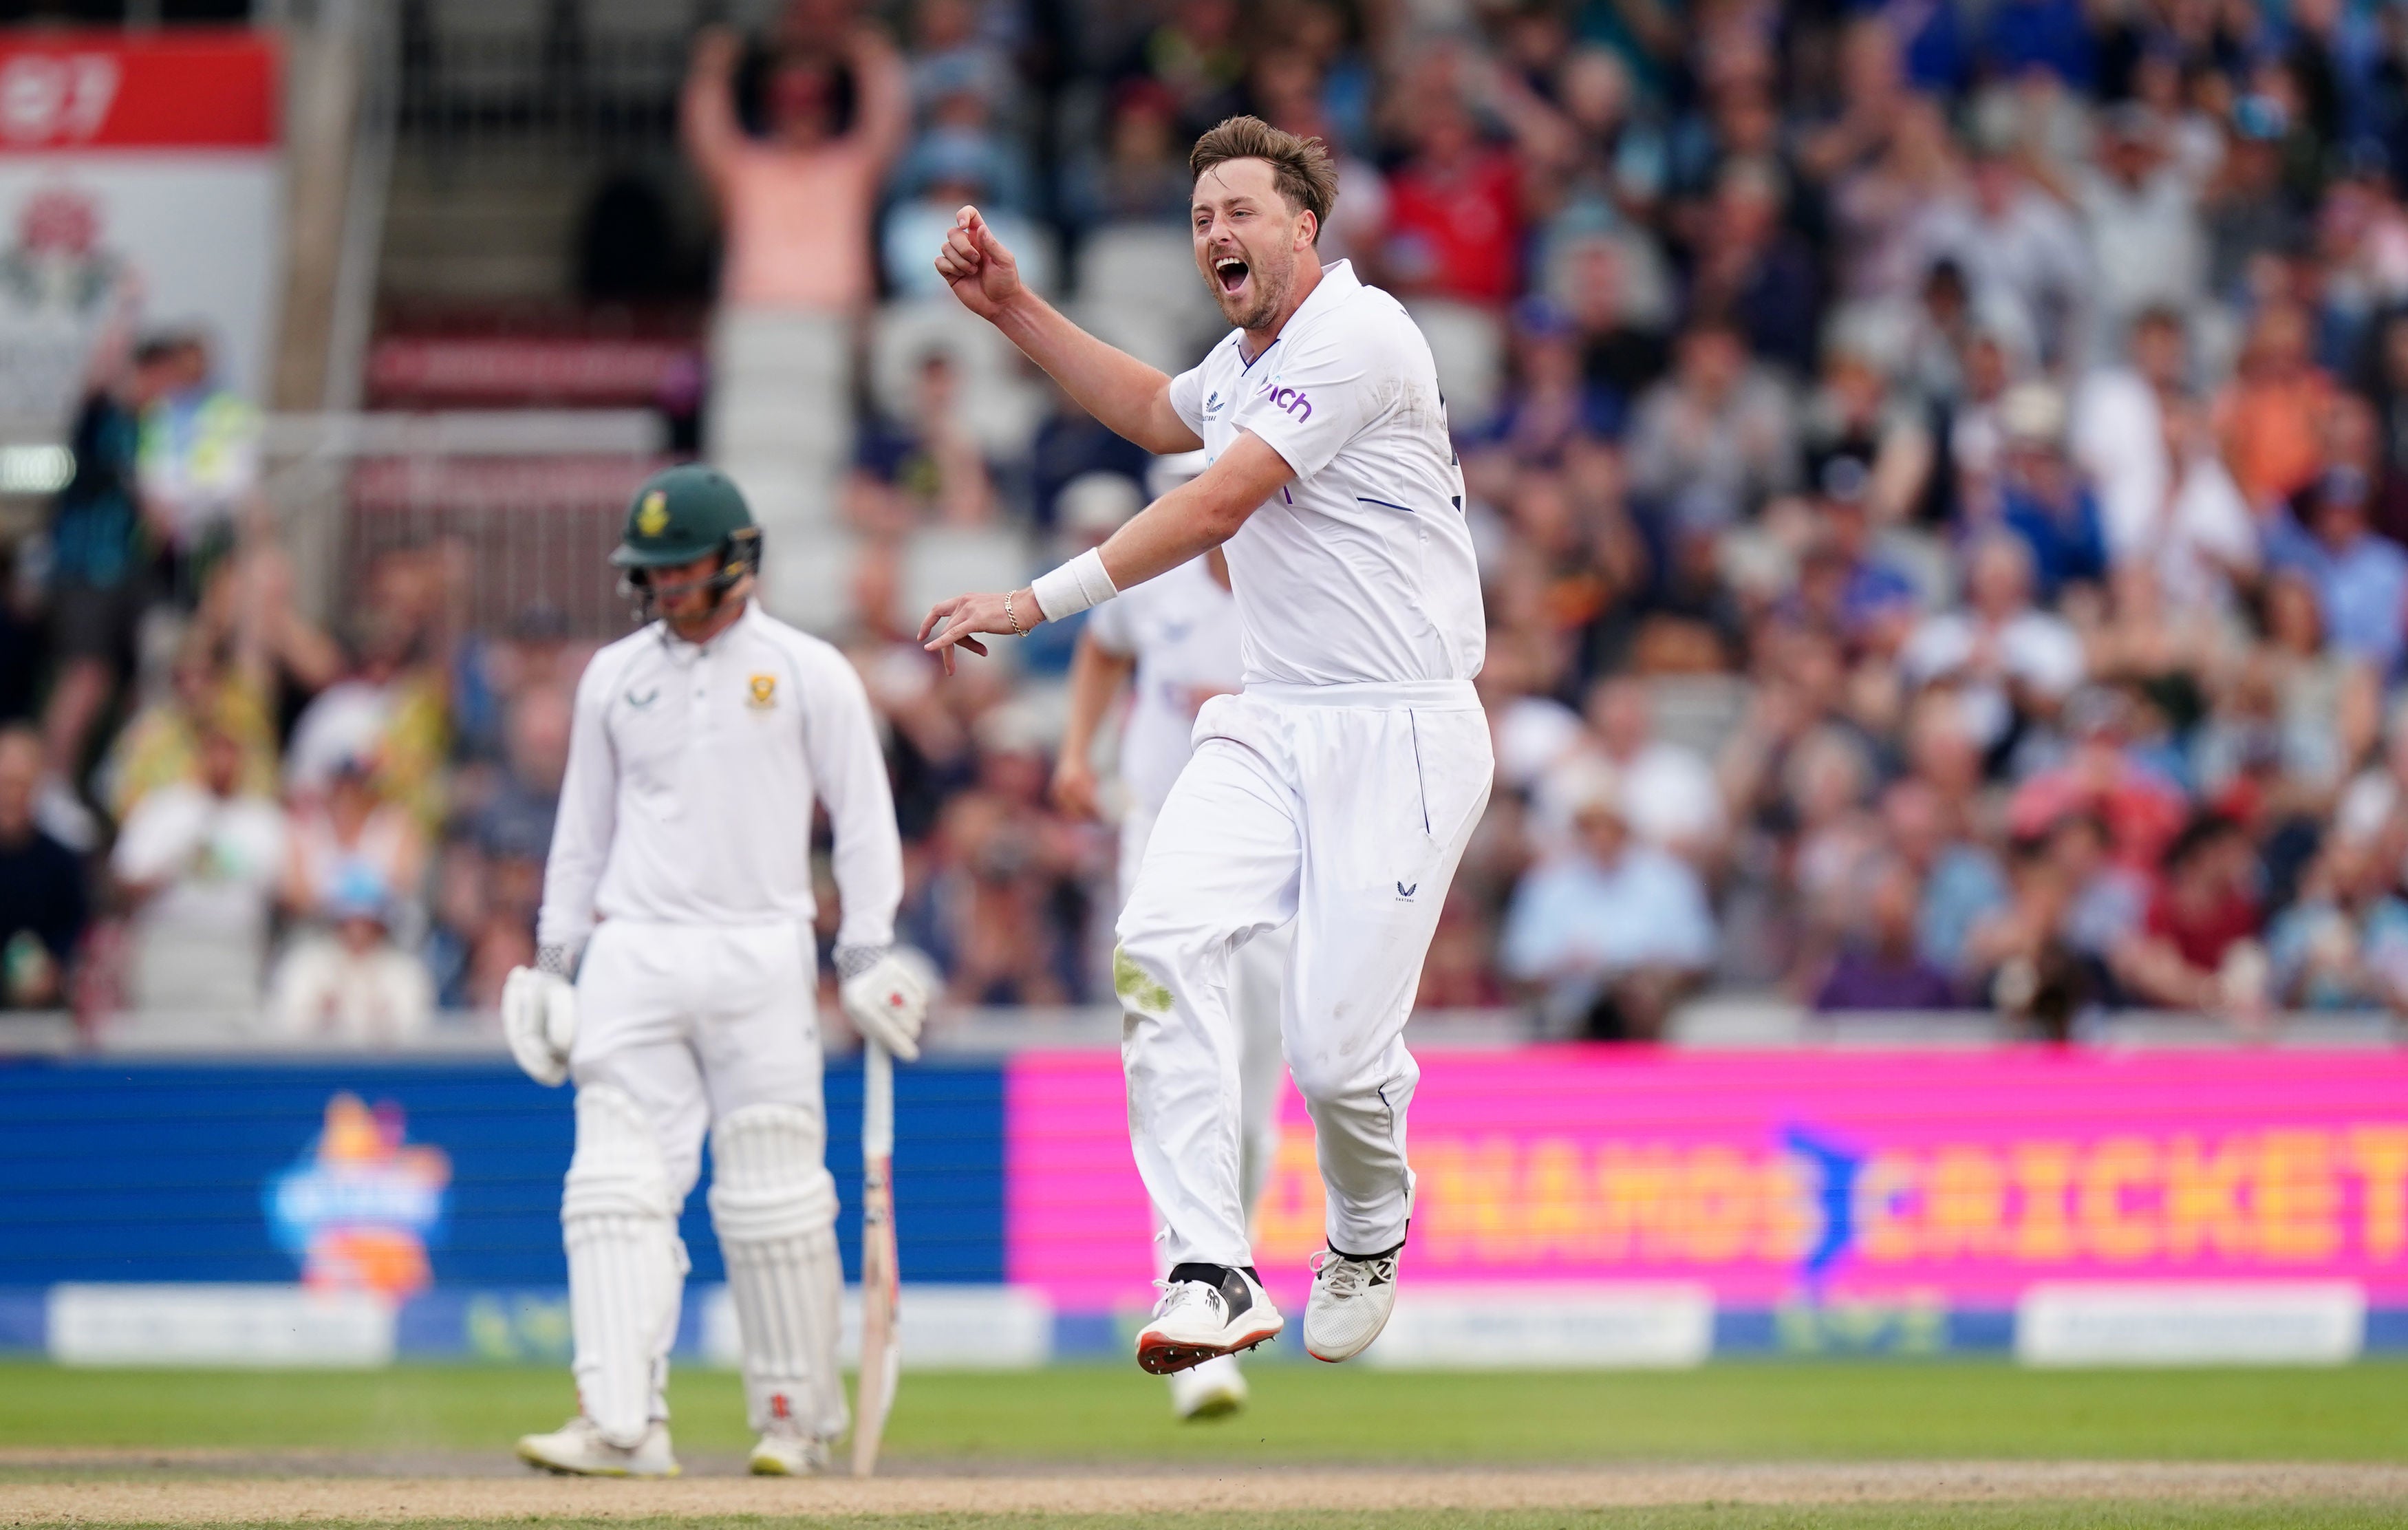 Englend Crickators J Root Xxx - England vs South Africa LIVE: Cricket result and scorecard as England win  second Test at Old Trafford | The Independent